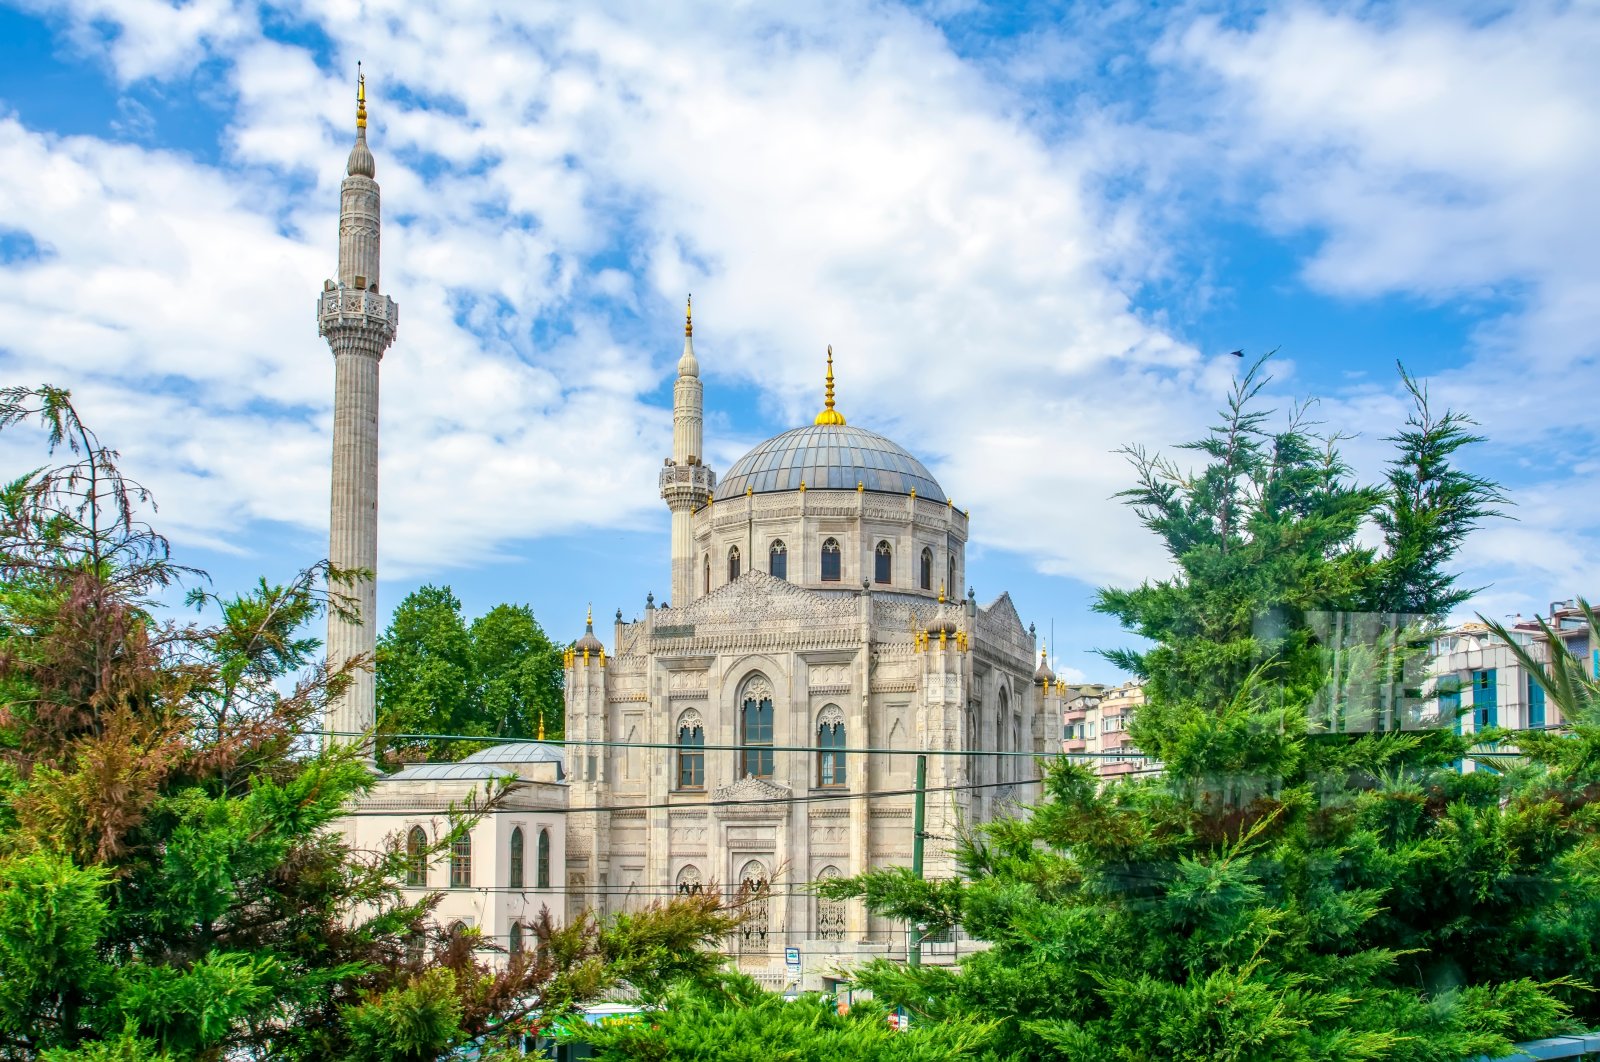 Trees with the Pertevniyal Valide Sultan Mosque, Aksaray, Istanbul. (Shutterstock)